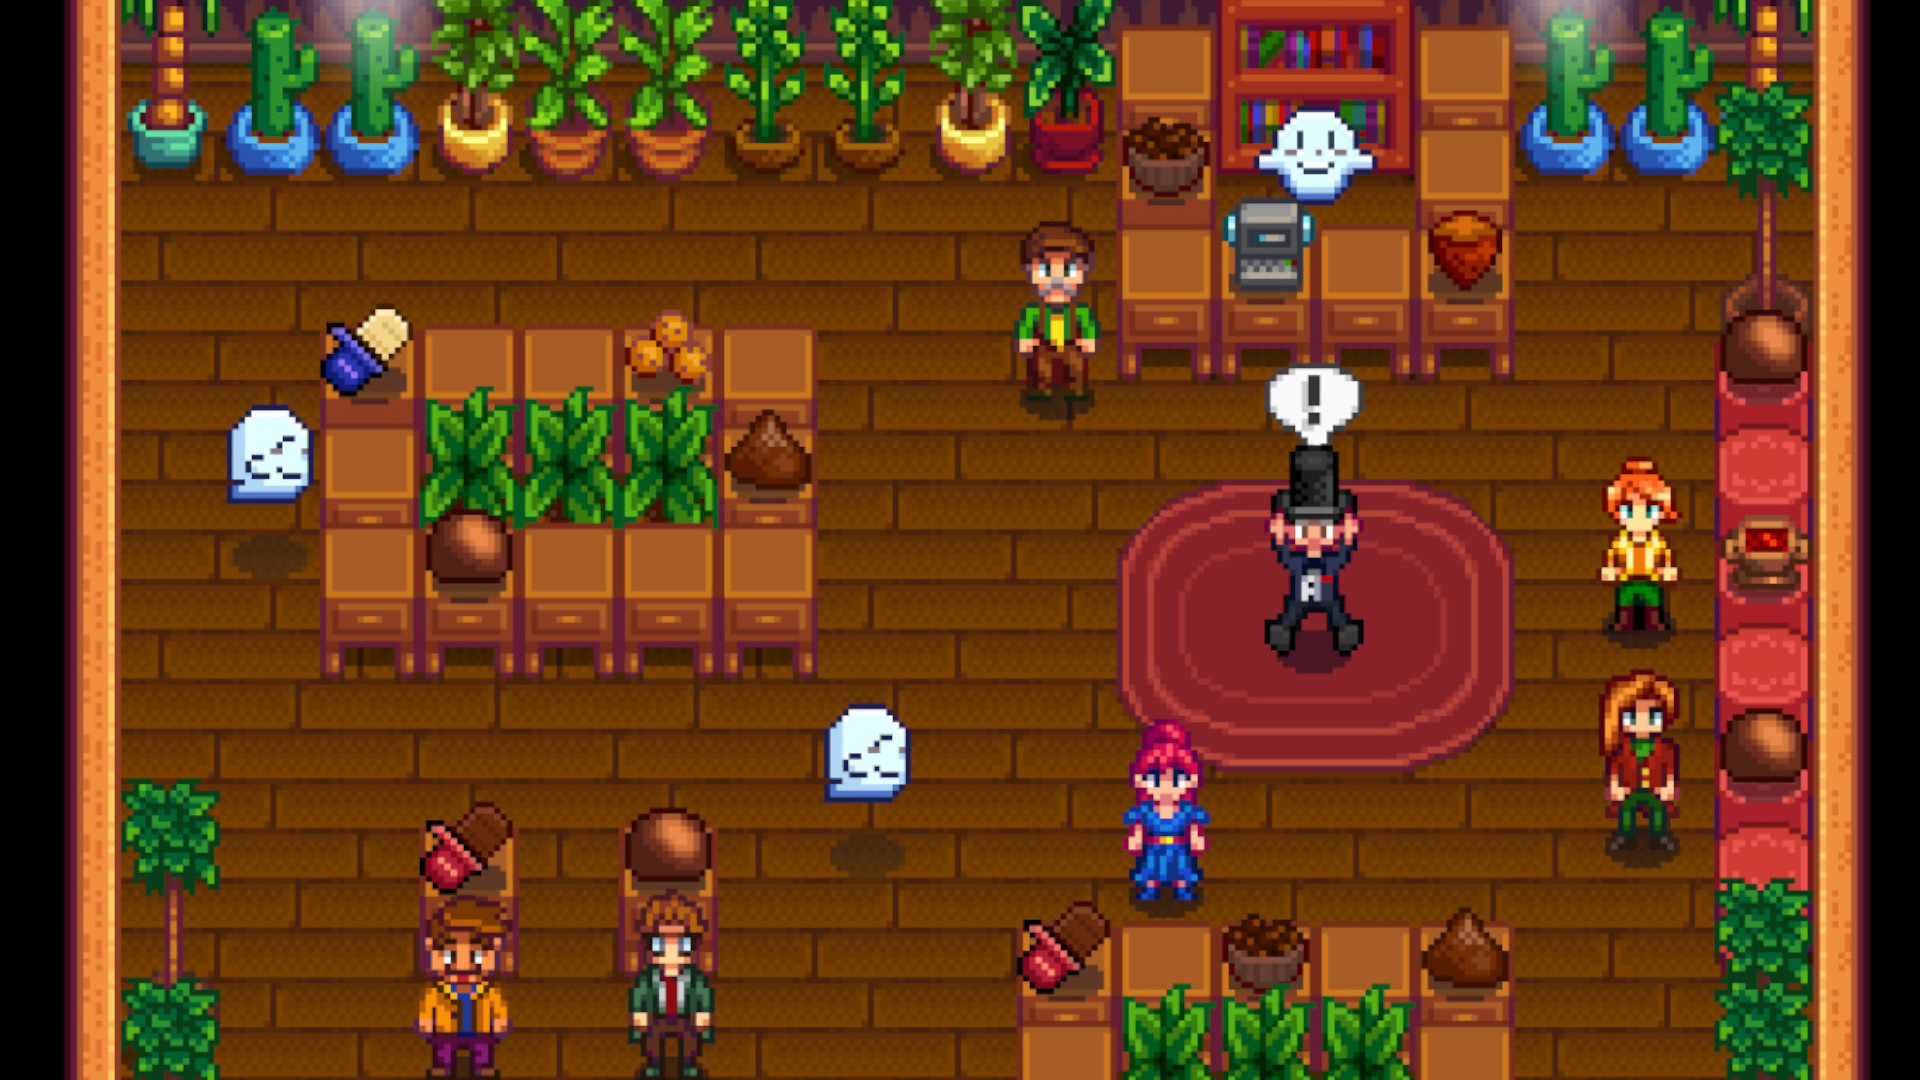 Stardew Valley modders are already bringing Haunted Chocolatier to life